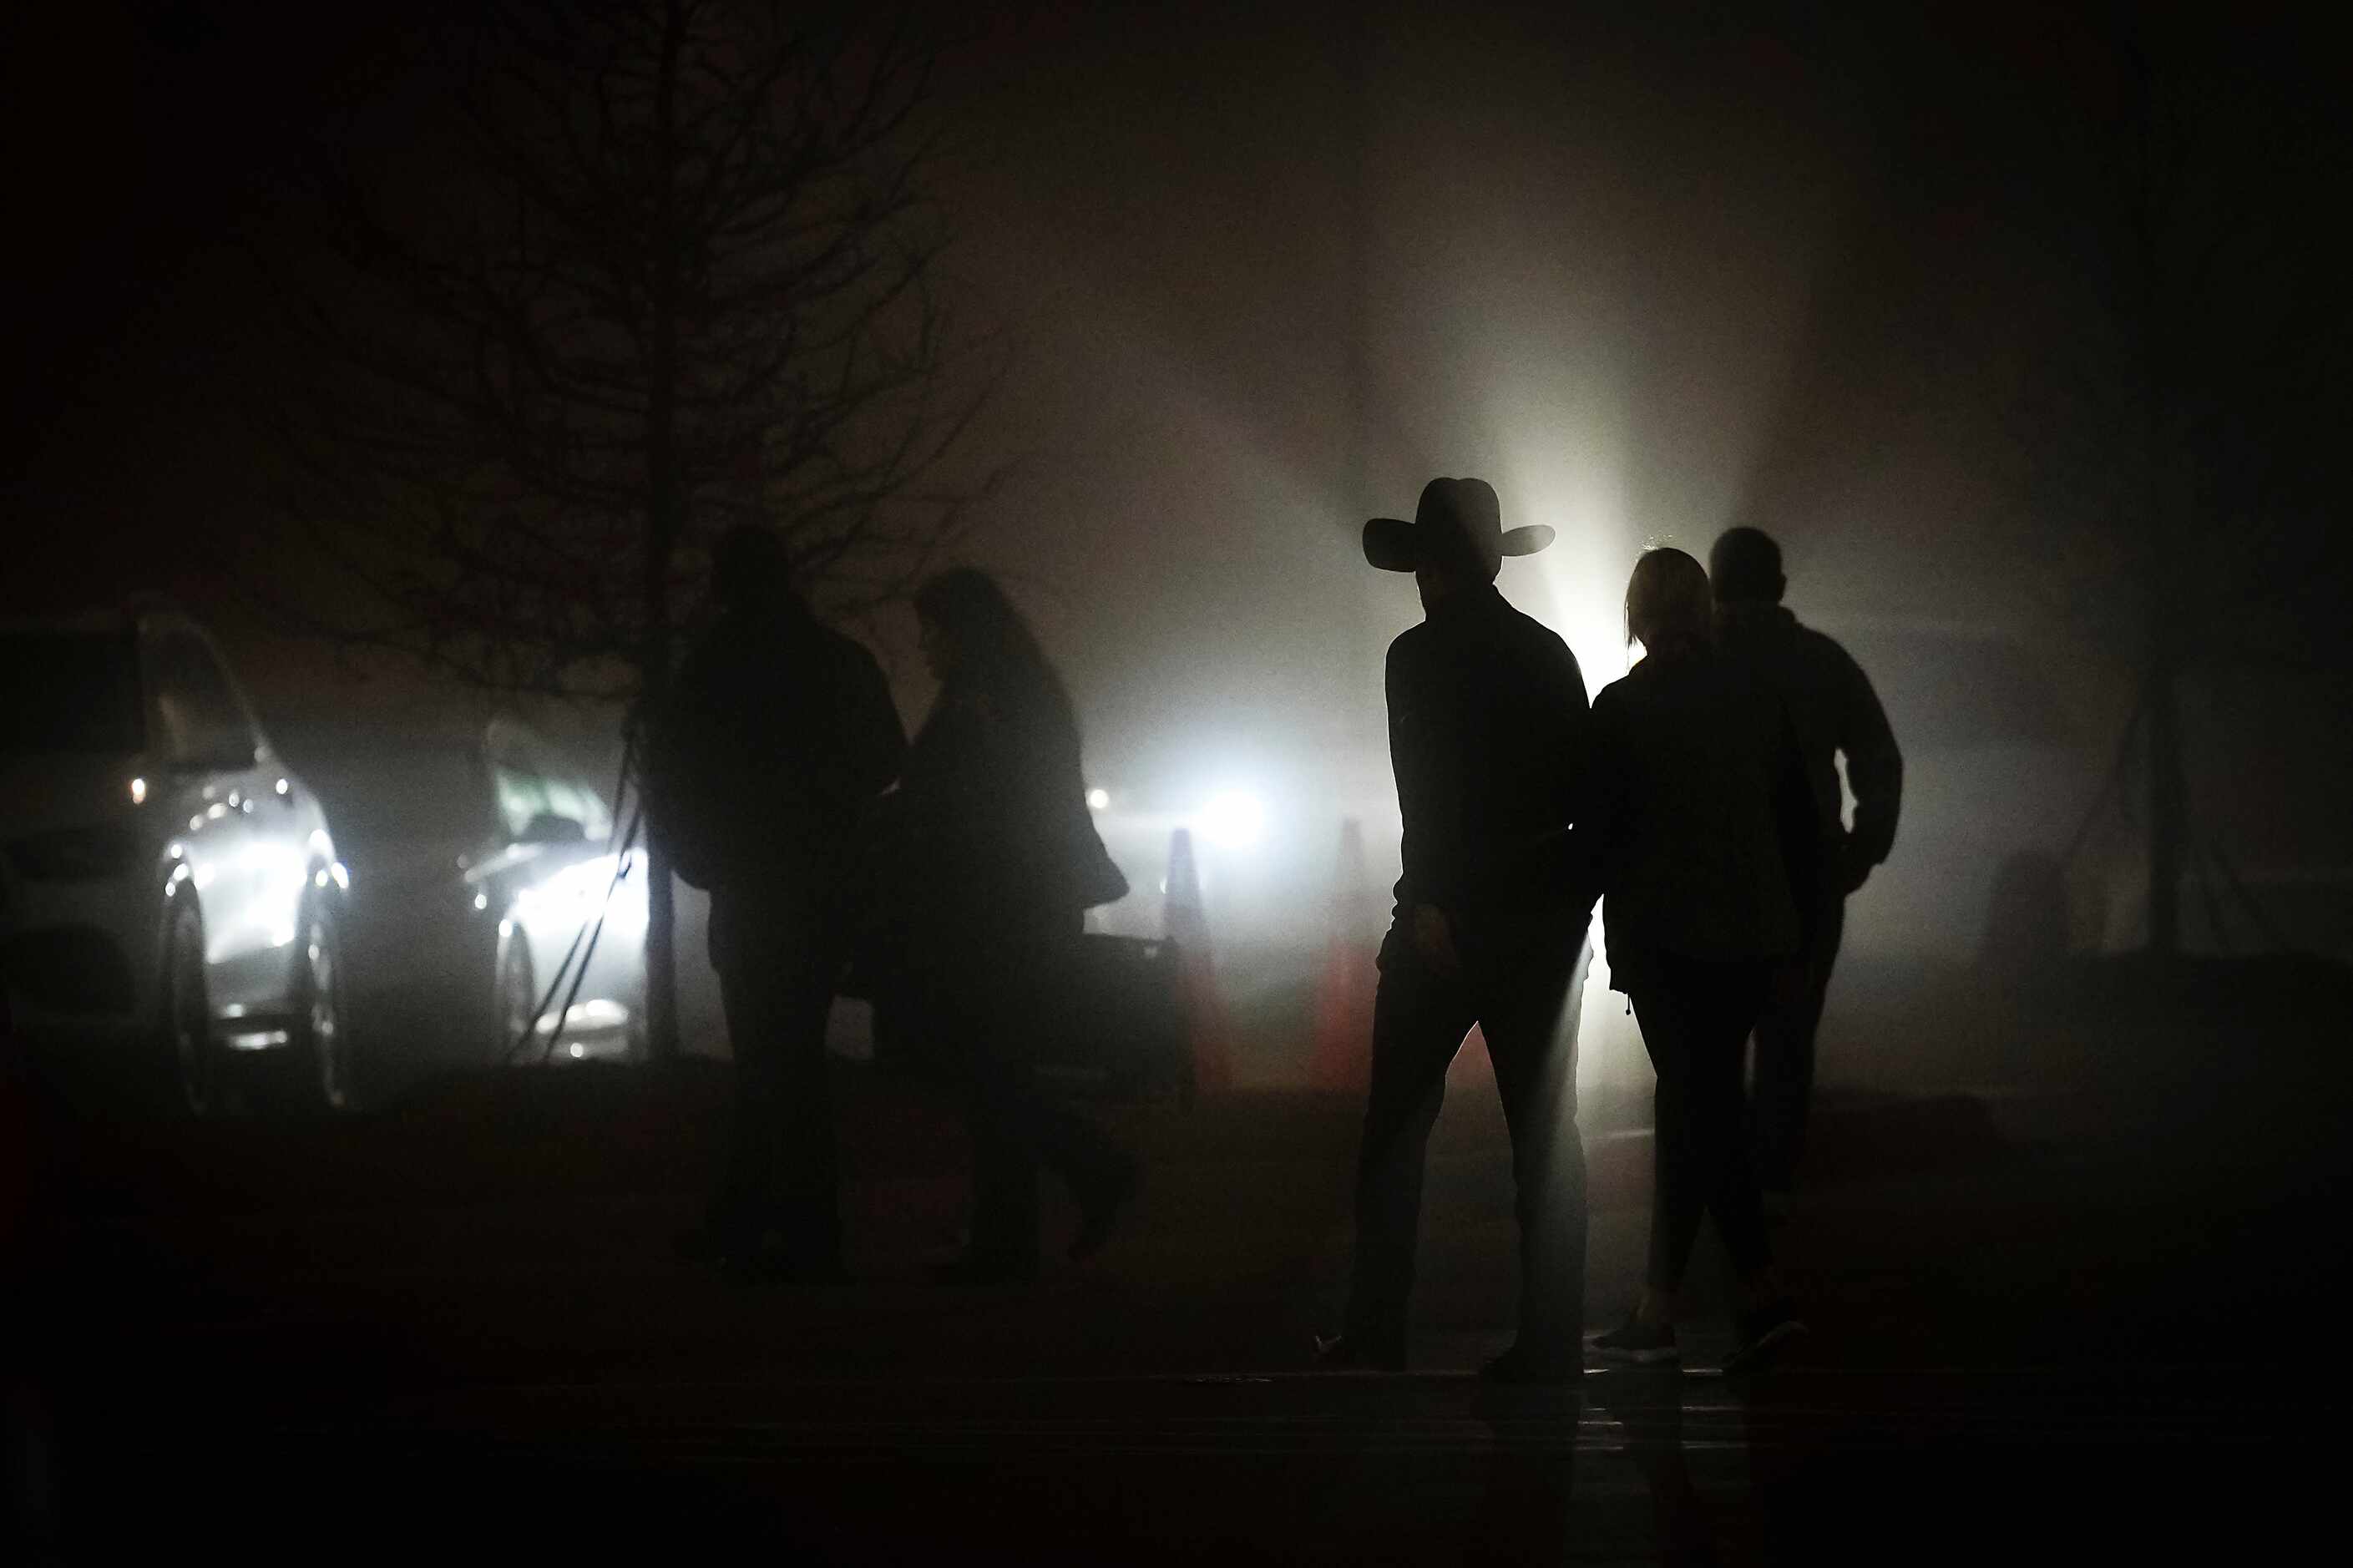 Argyle fans head to their cars as fog shrouds the parking lot following a loss to South Oak...